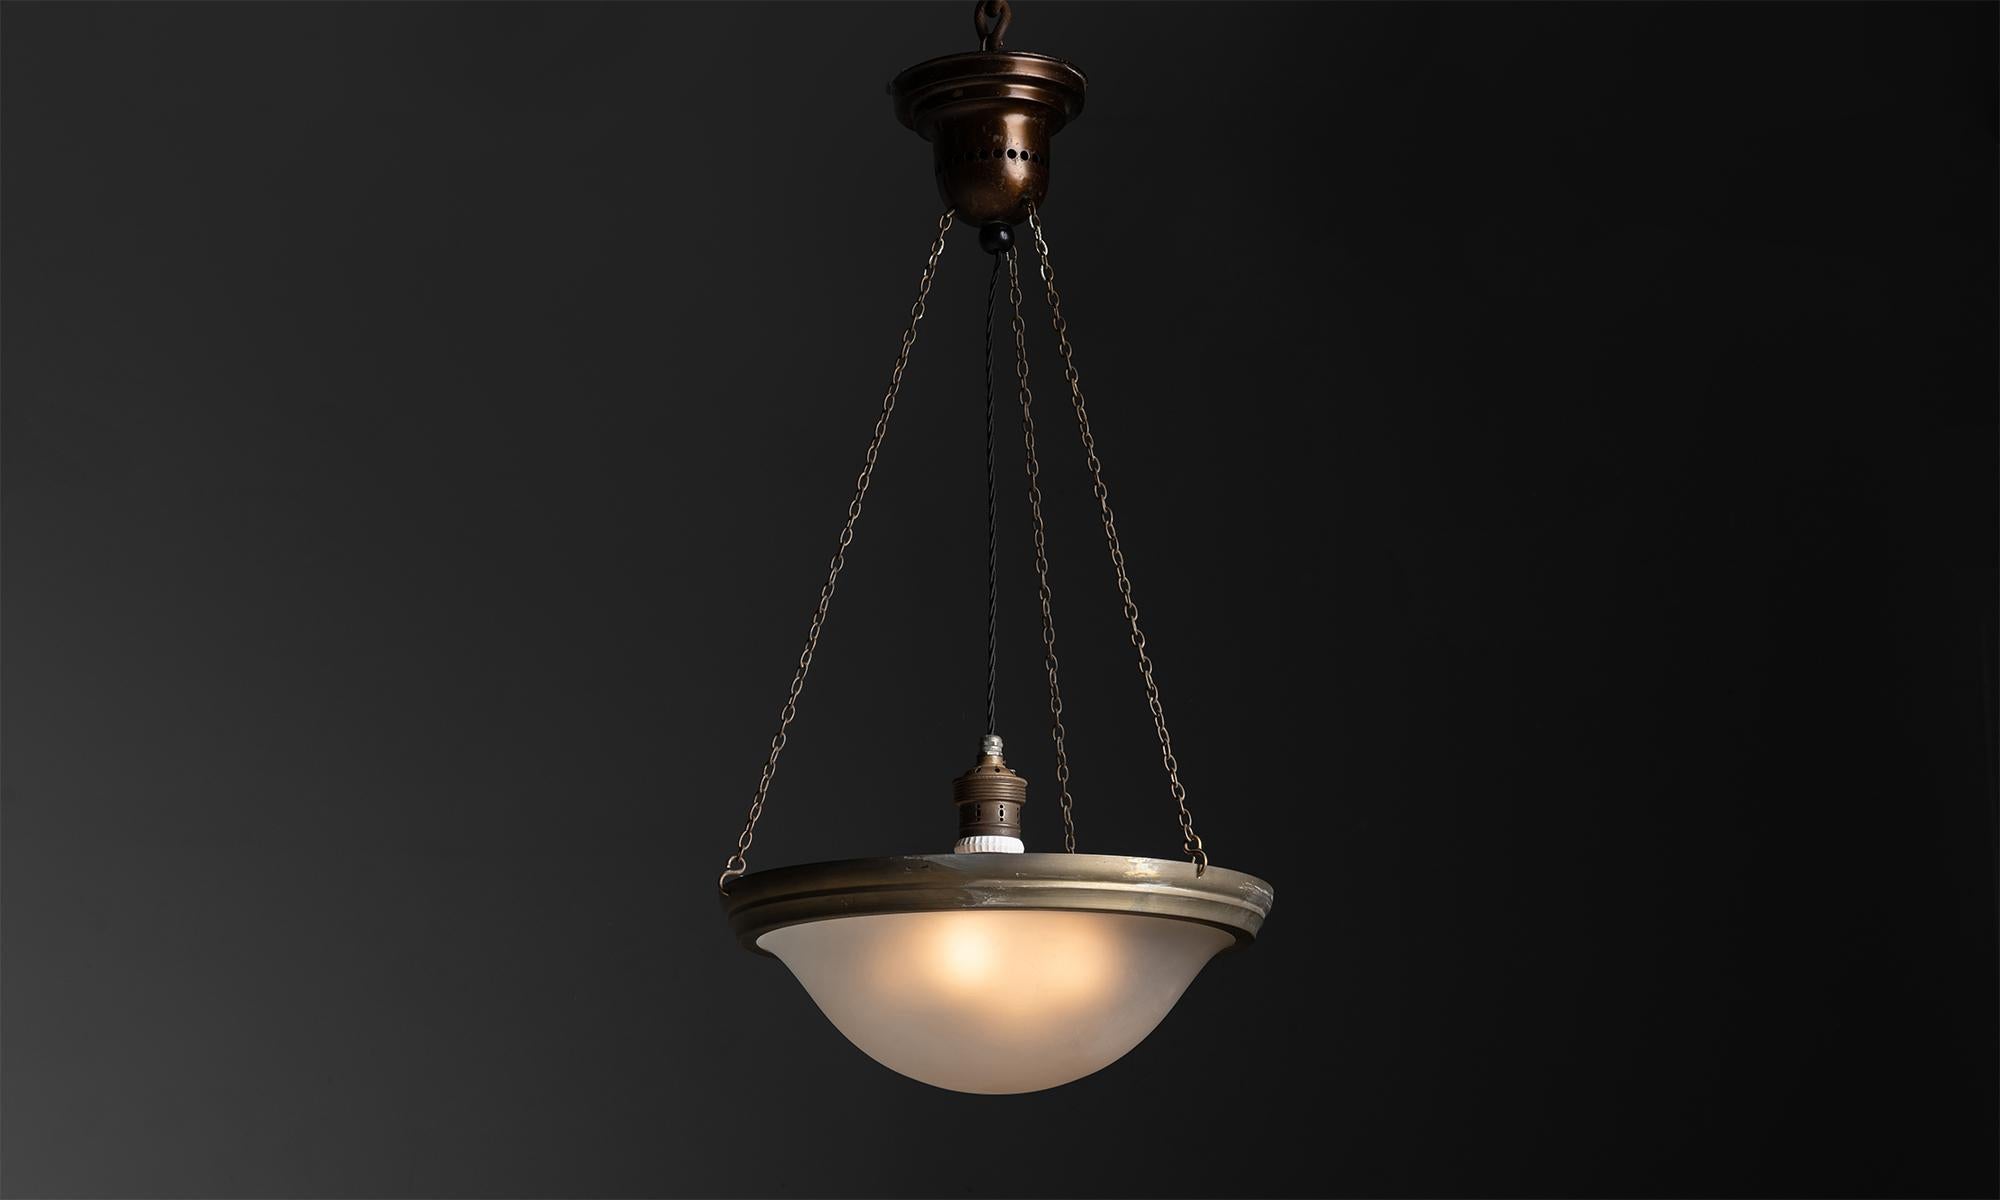 Etched Suspension Light, Germany, circa 1920

Measures 17.5“dia x 33”h

*Not UL Listed*.